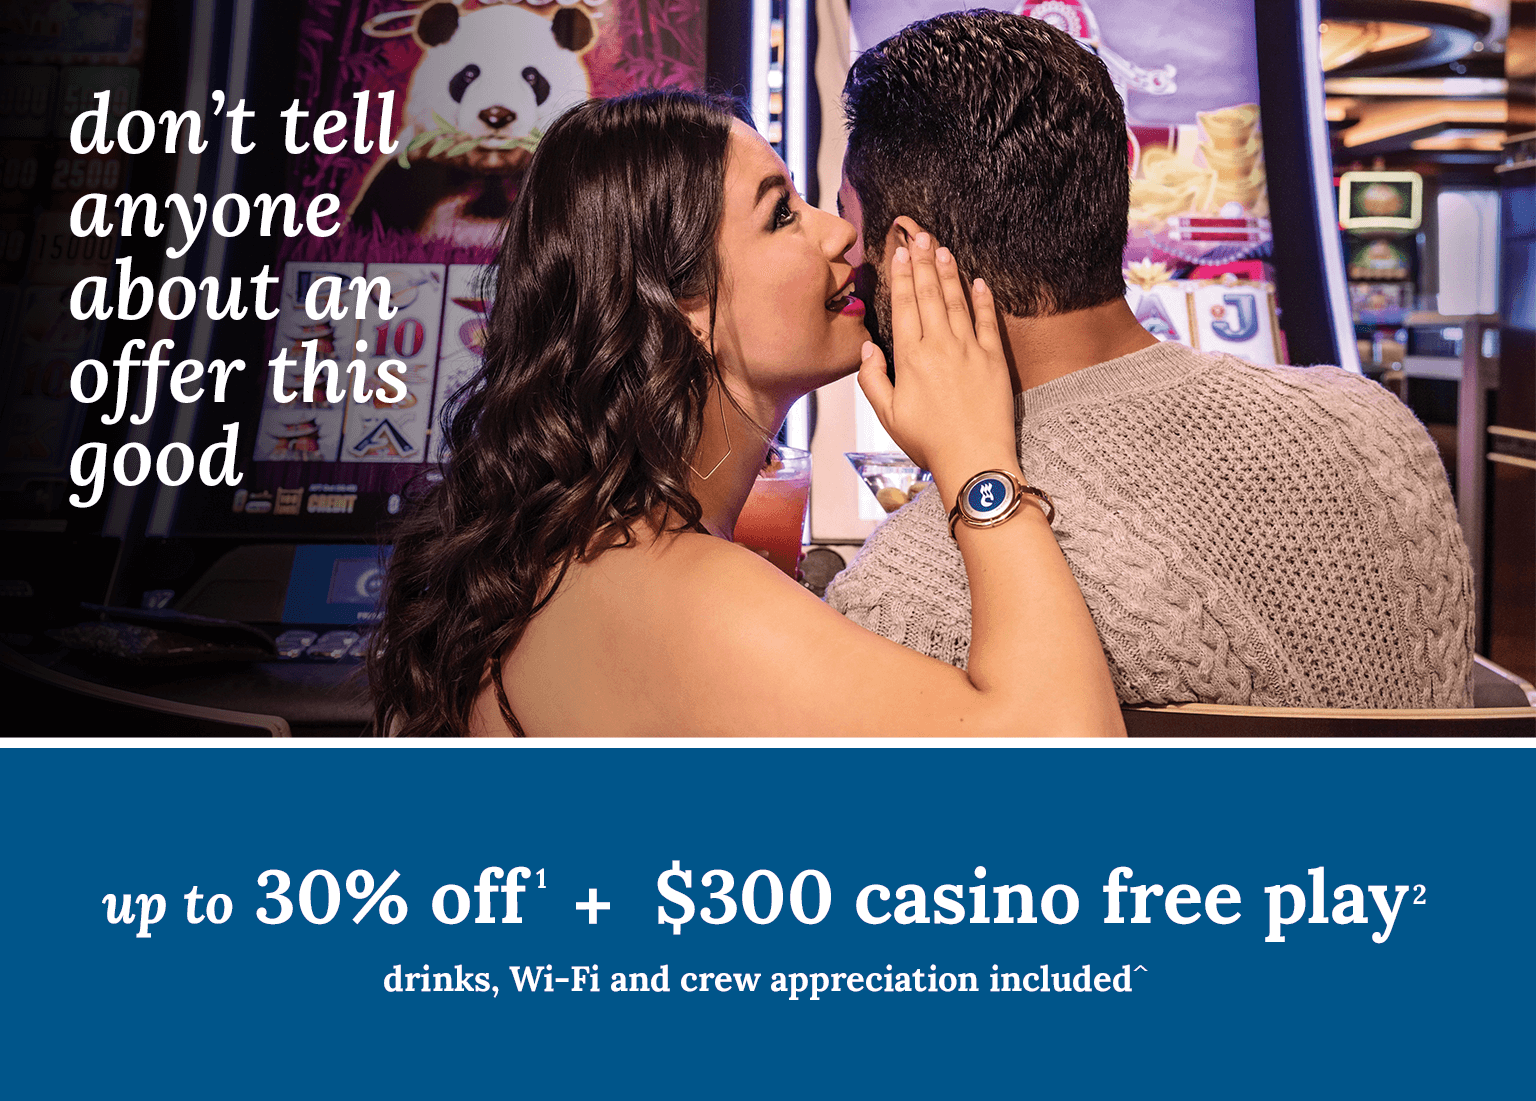 up to 30% off + $300 casino free play + drinks, Wi-Fi and crew appreciation included. Click here to book.